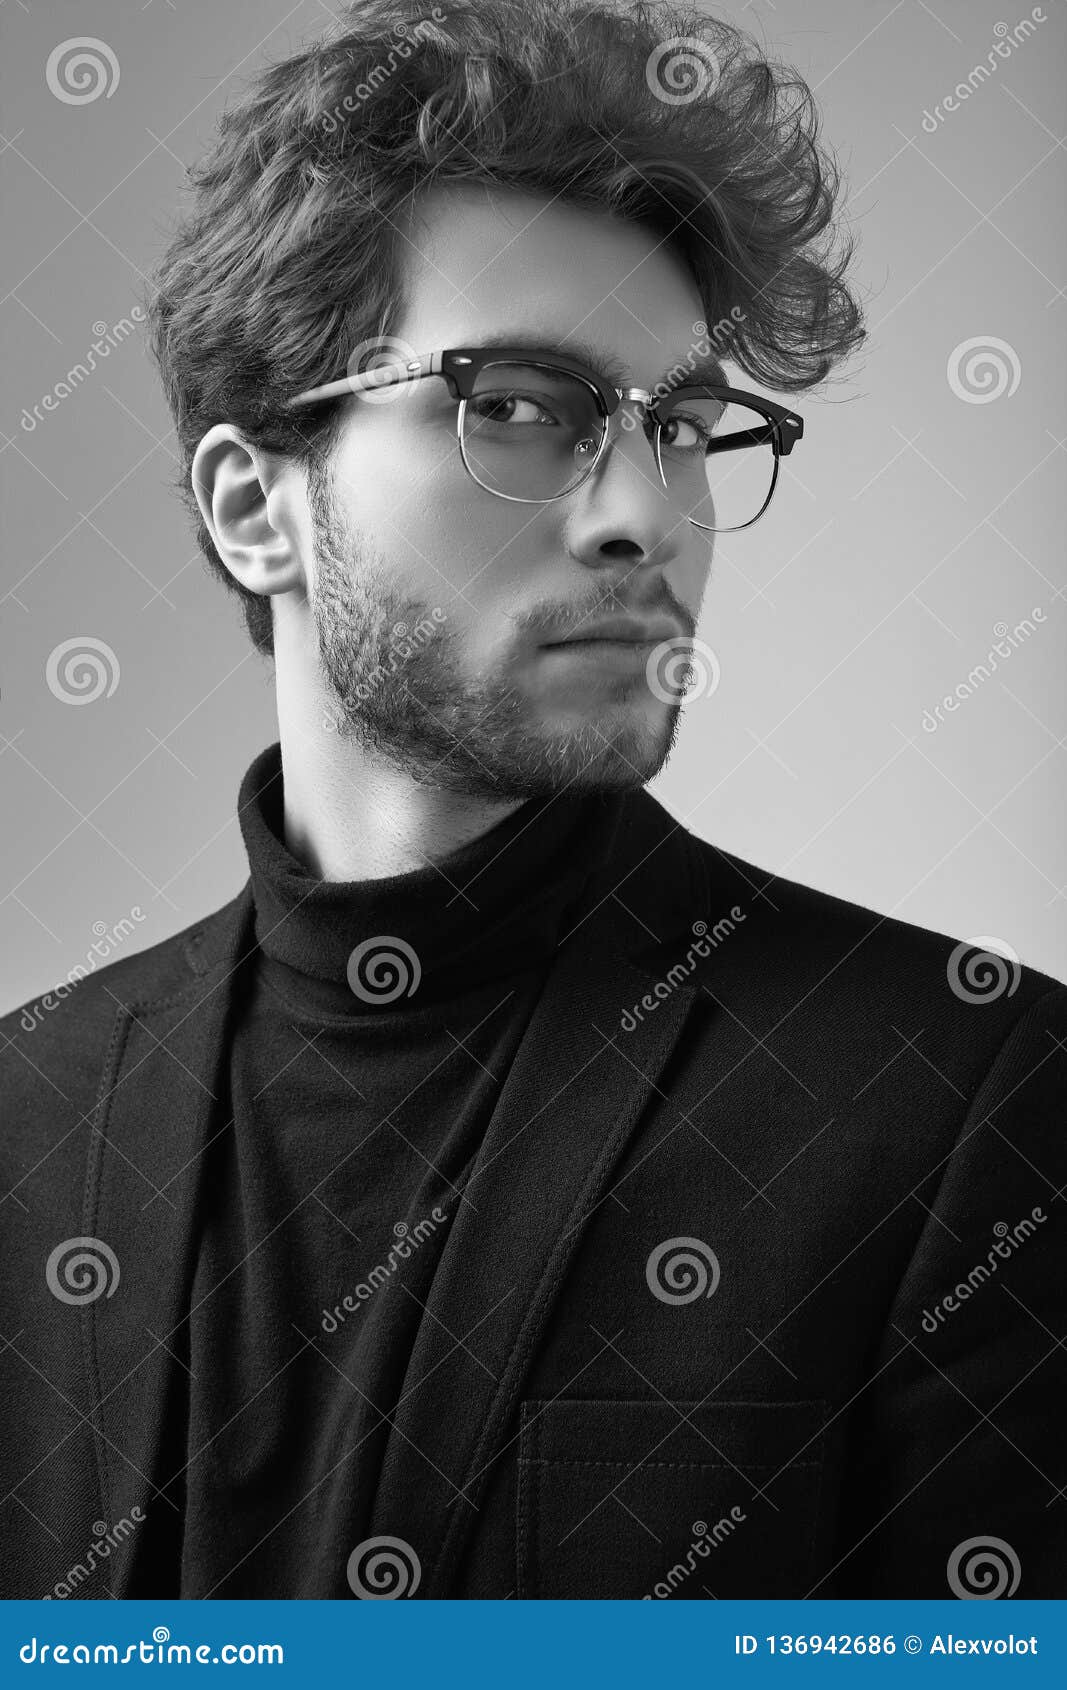 Handsome Elegant Man with Curly Hair Wearing Suit and Glasses Stock Photo -  Image of finance, business: 136942686